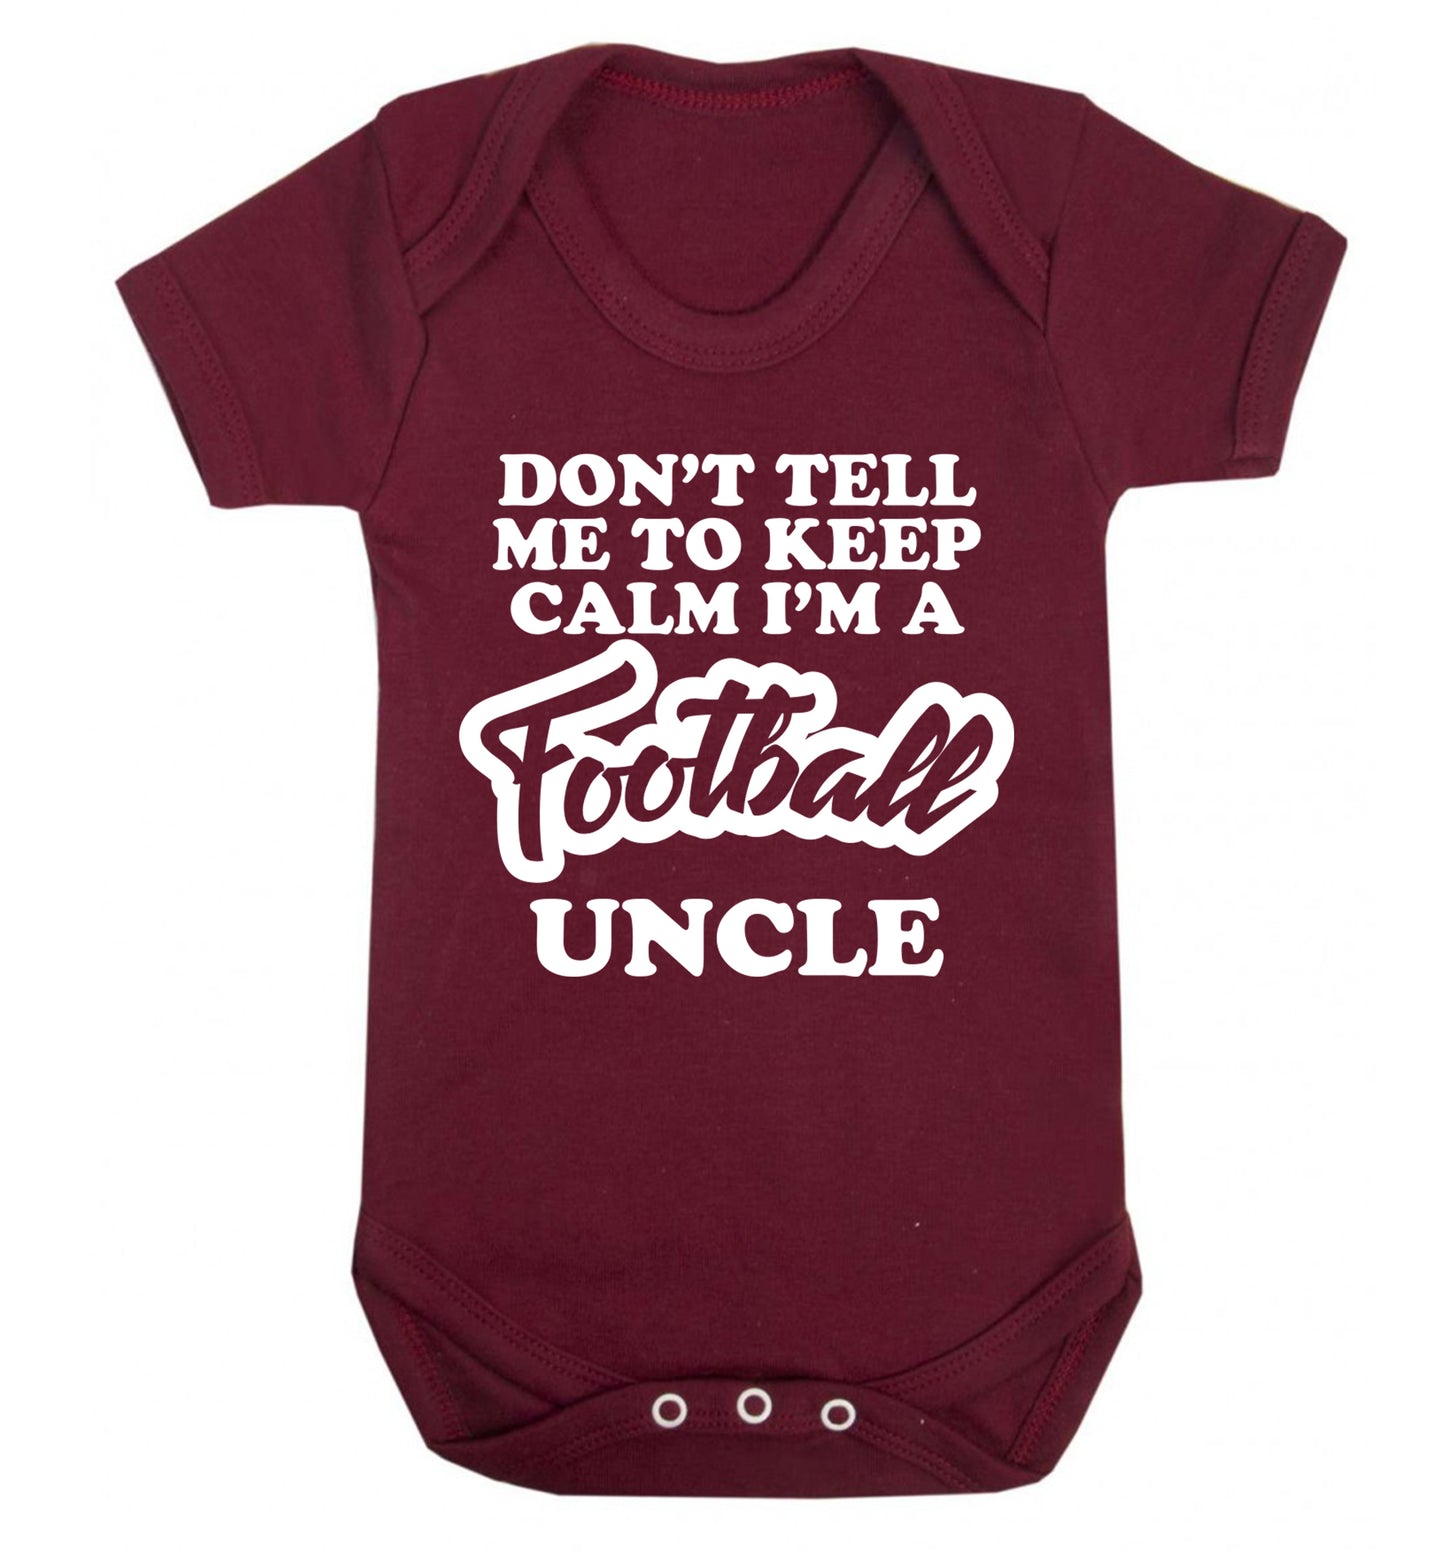 Don't tell me to keep calm I'm a football uncle Baby Vest maroon 18-24 months